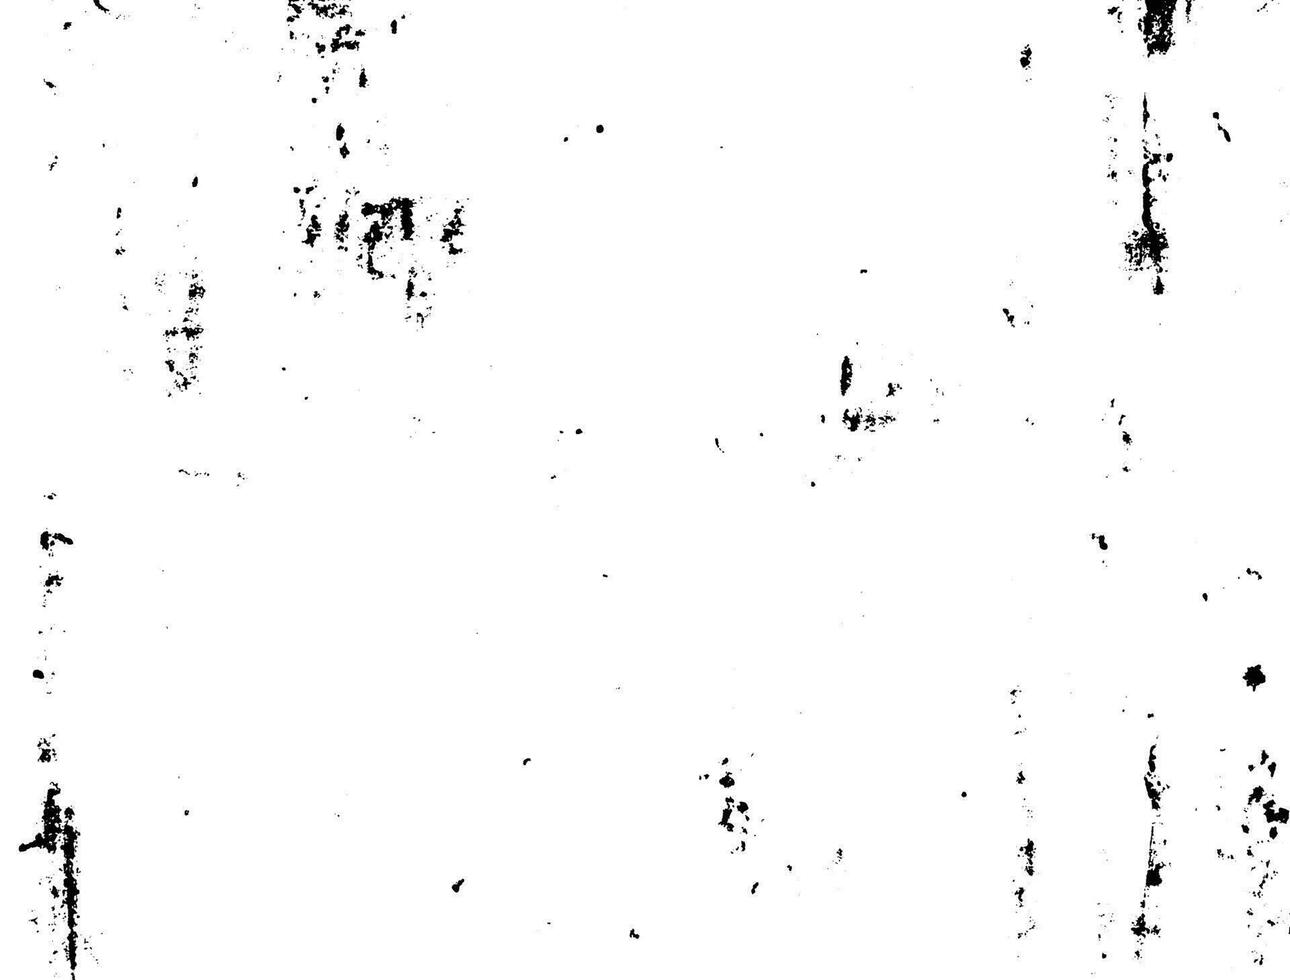 Black and white grunge urban texture vector with copy space. Abstract illustration surface dust and rough dirty wall background with empty template. Distress or dirt and grunge effect concept - vector